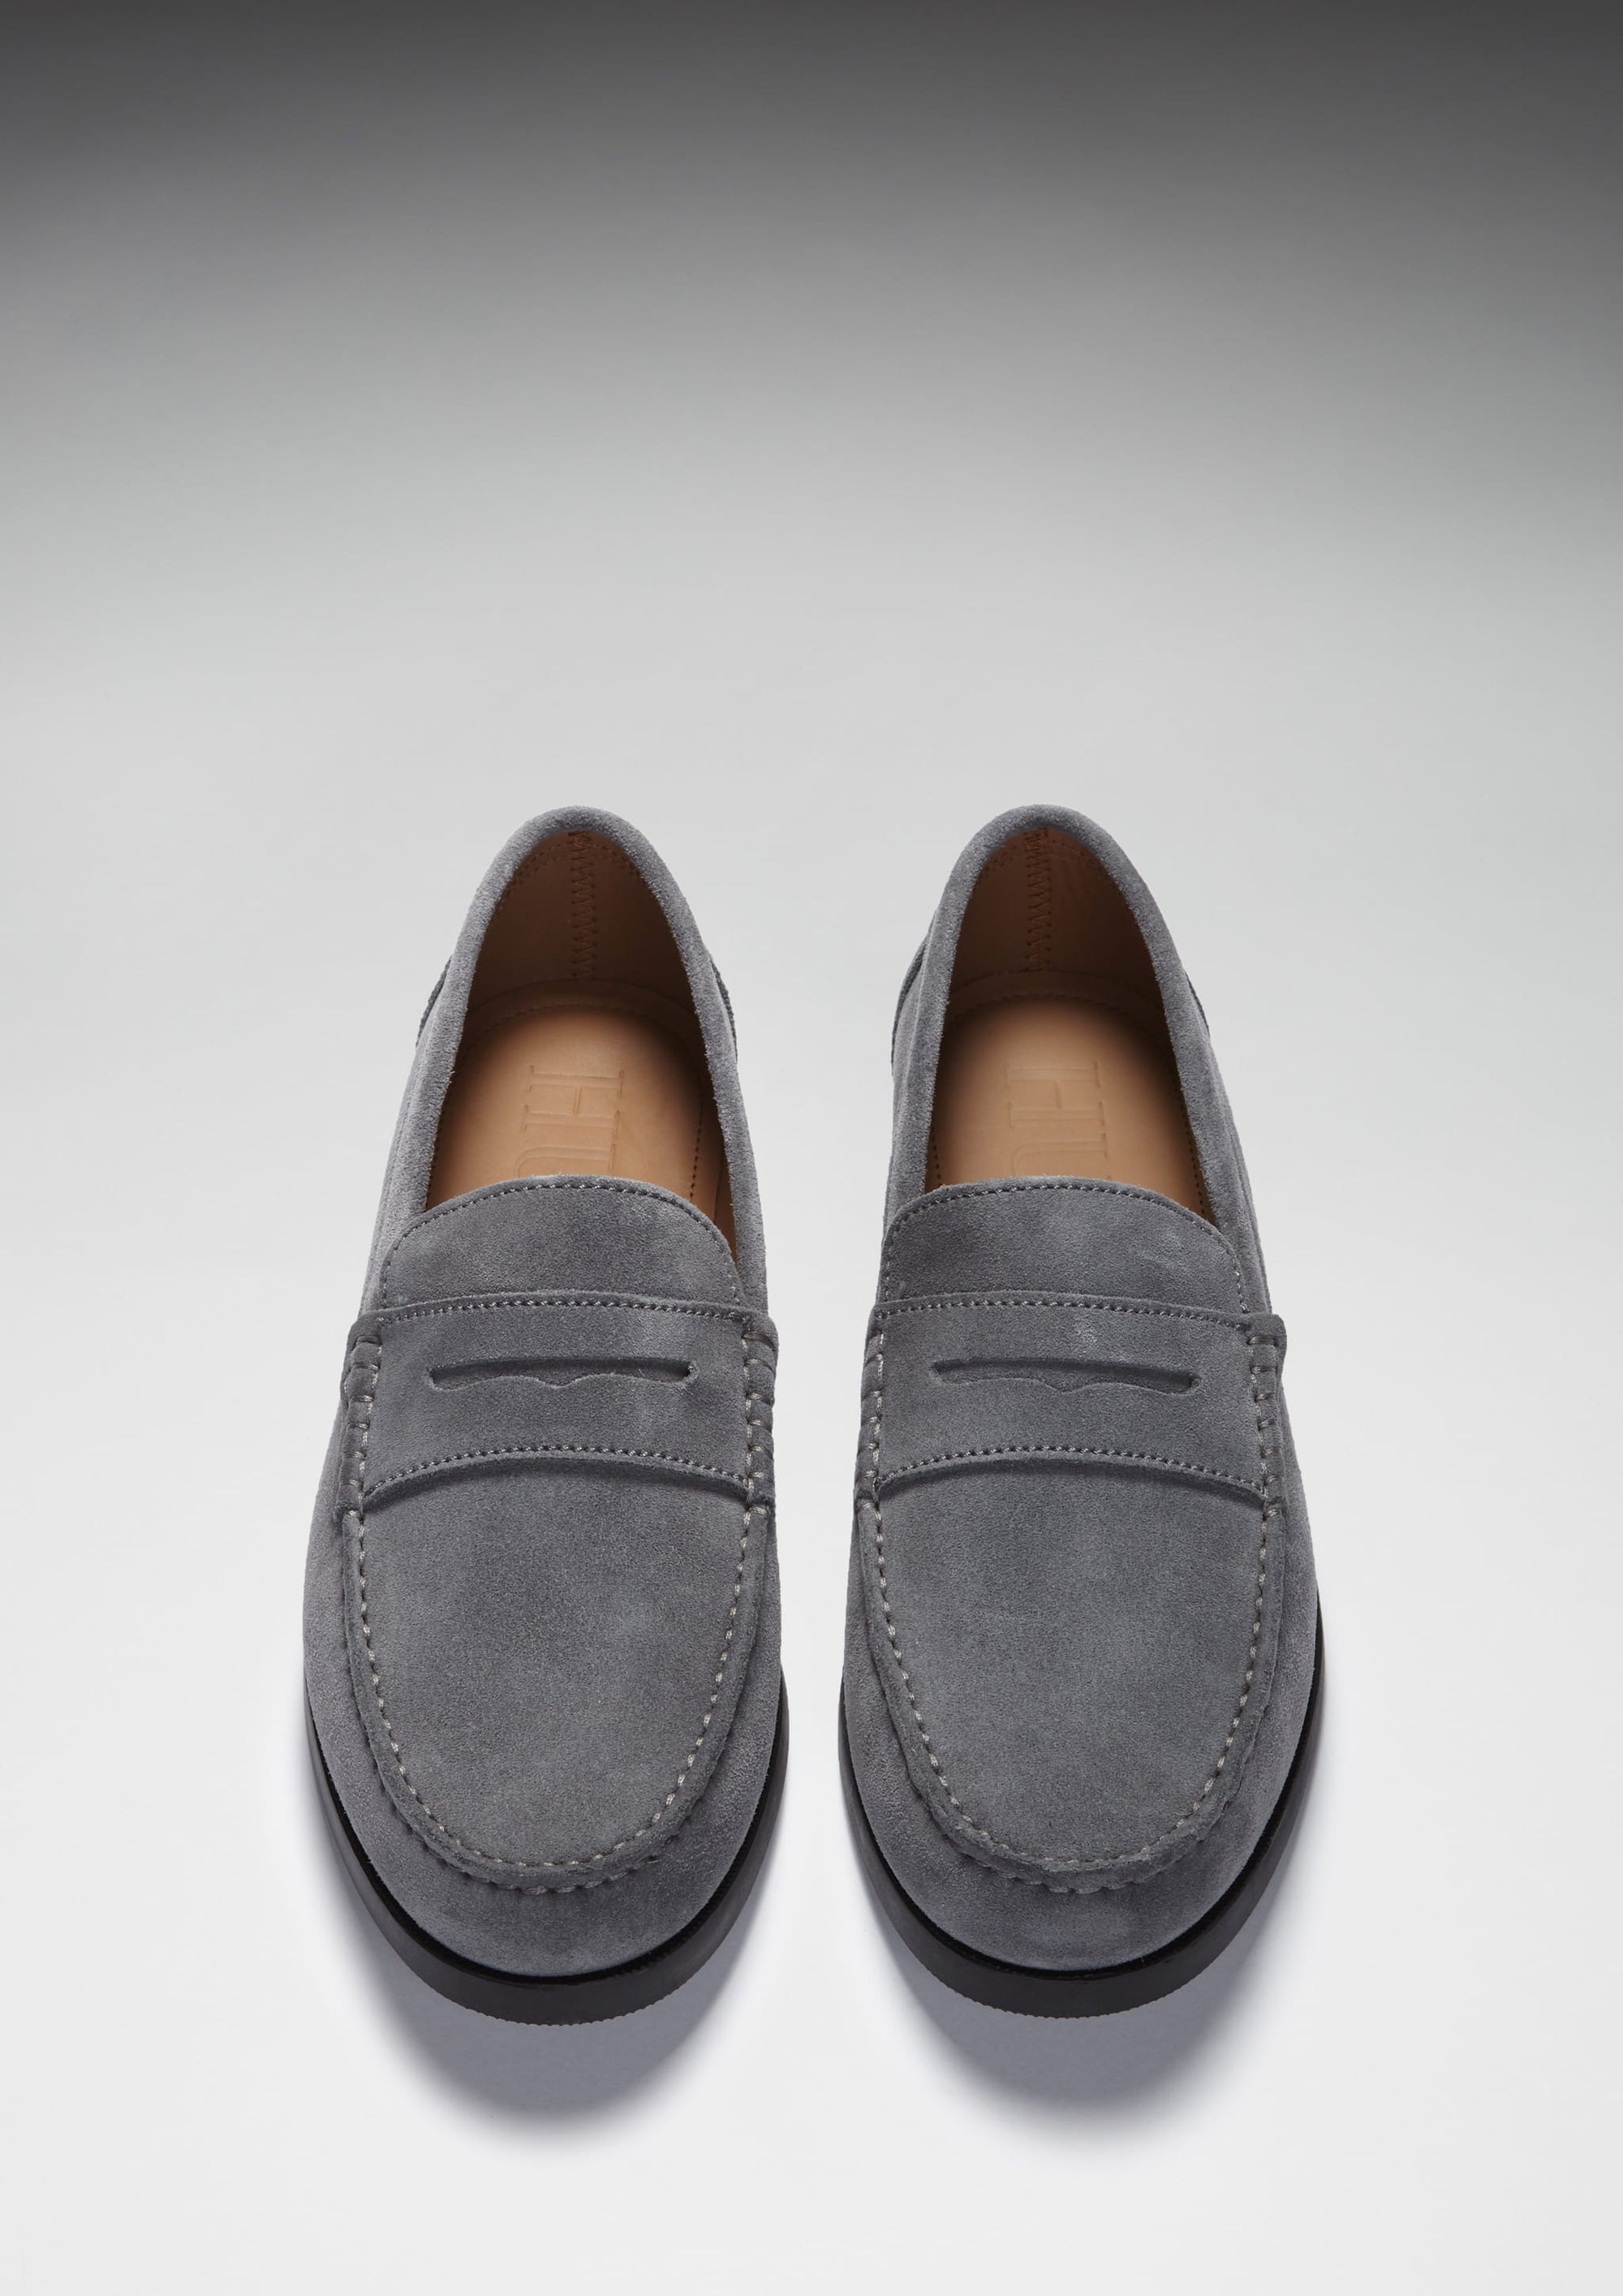 Boat Loafers, slate grey suede